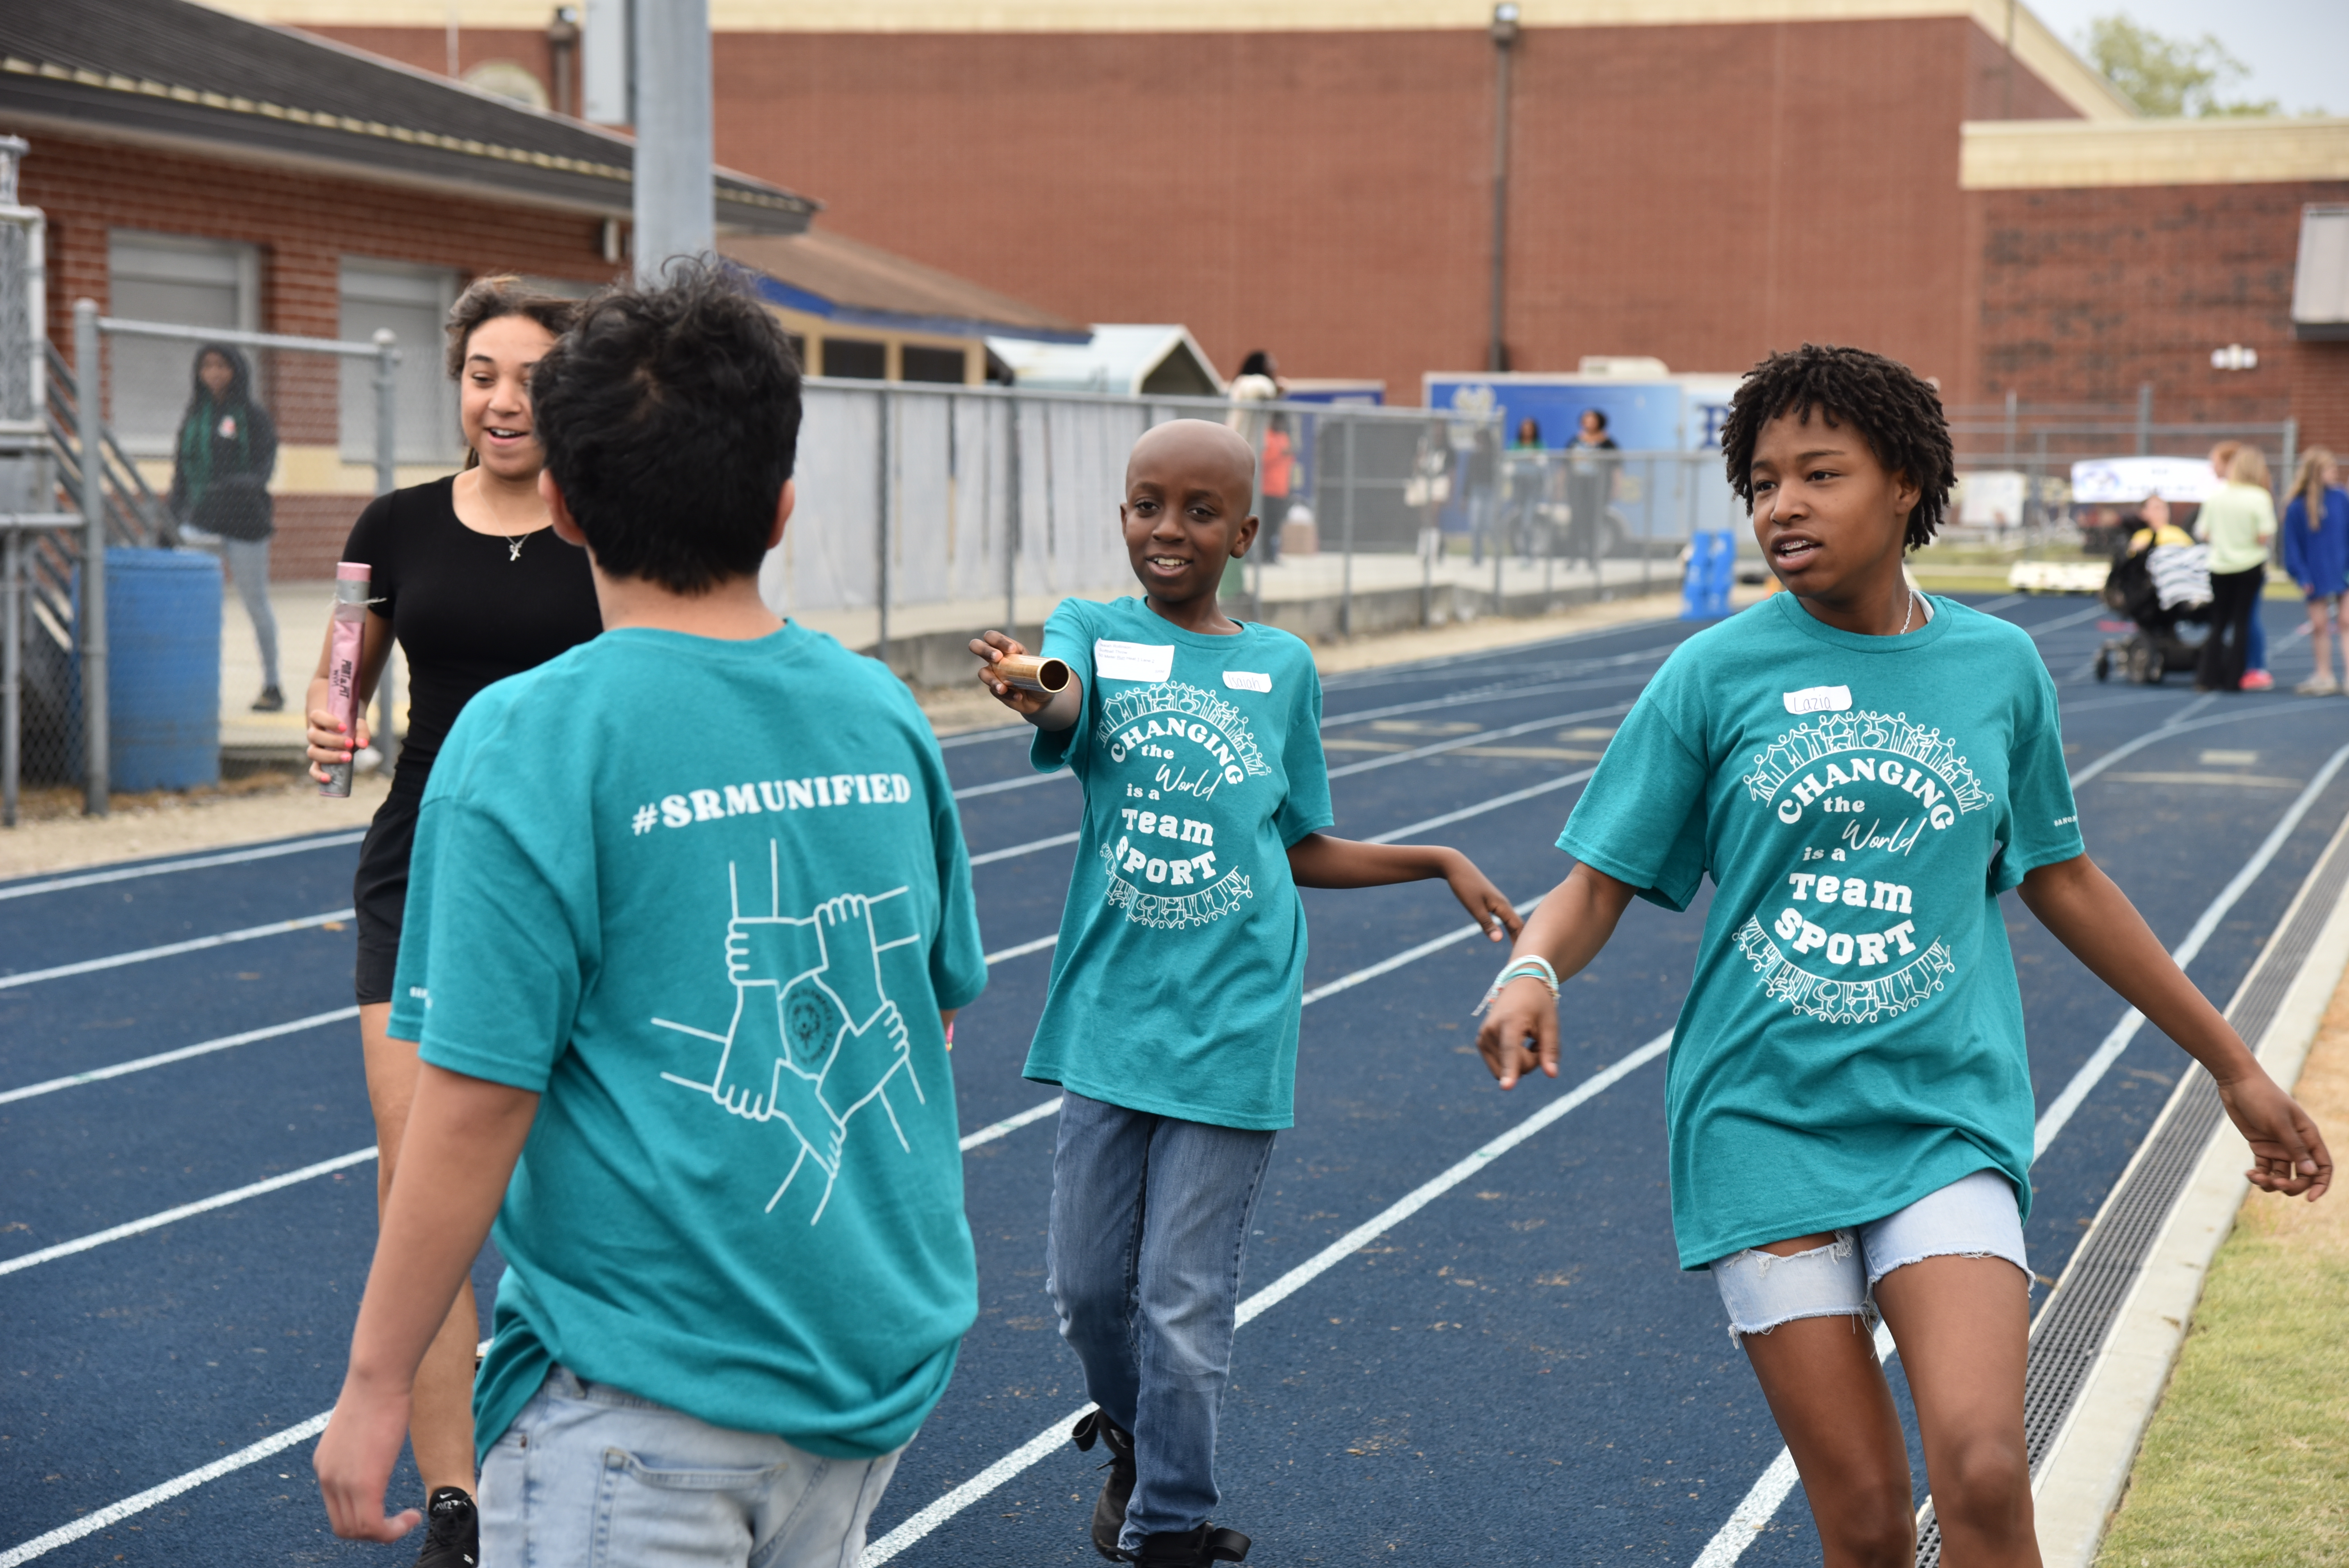 SRM students running relay race